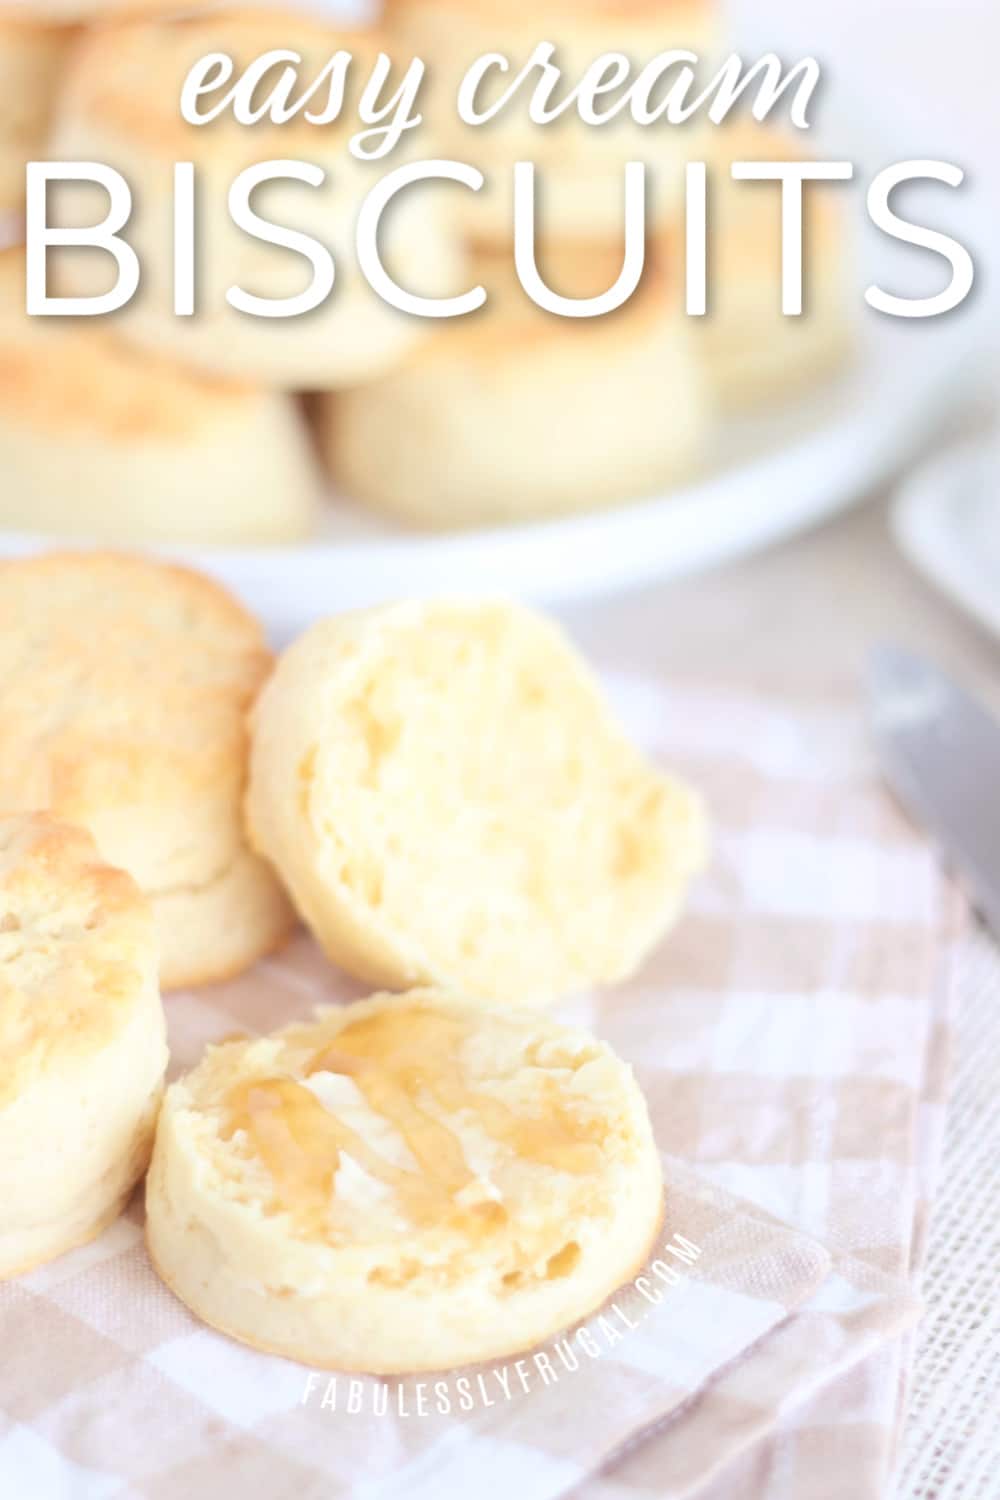 Easy make-ahead biscuit dough recipe